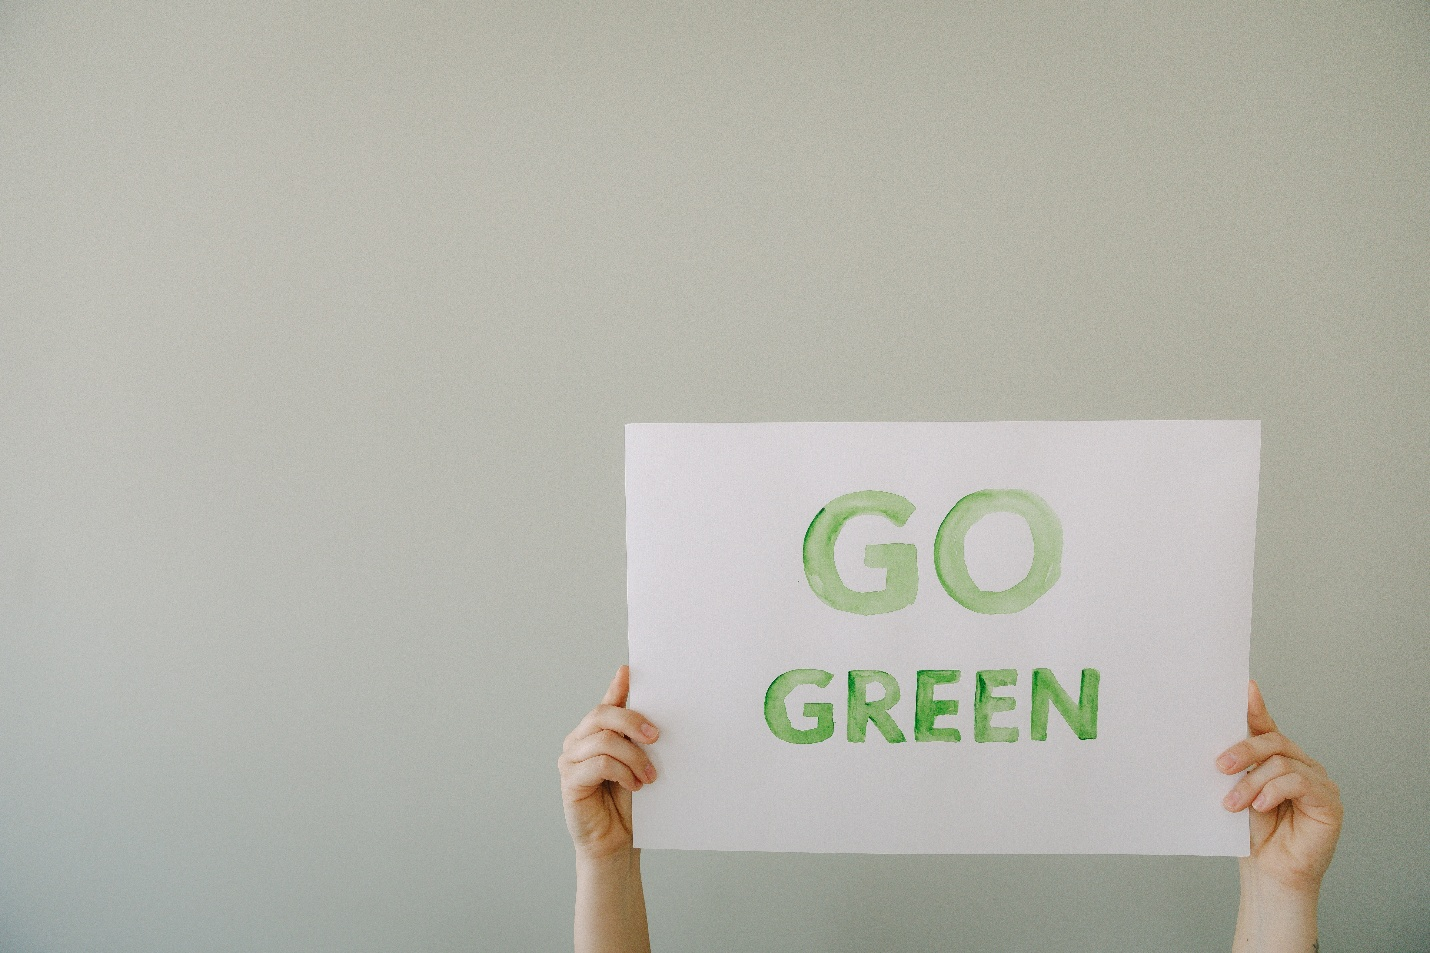  A pair of hands holding a “go green” sign